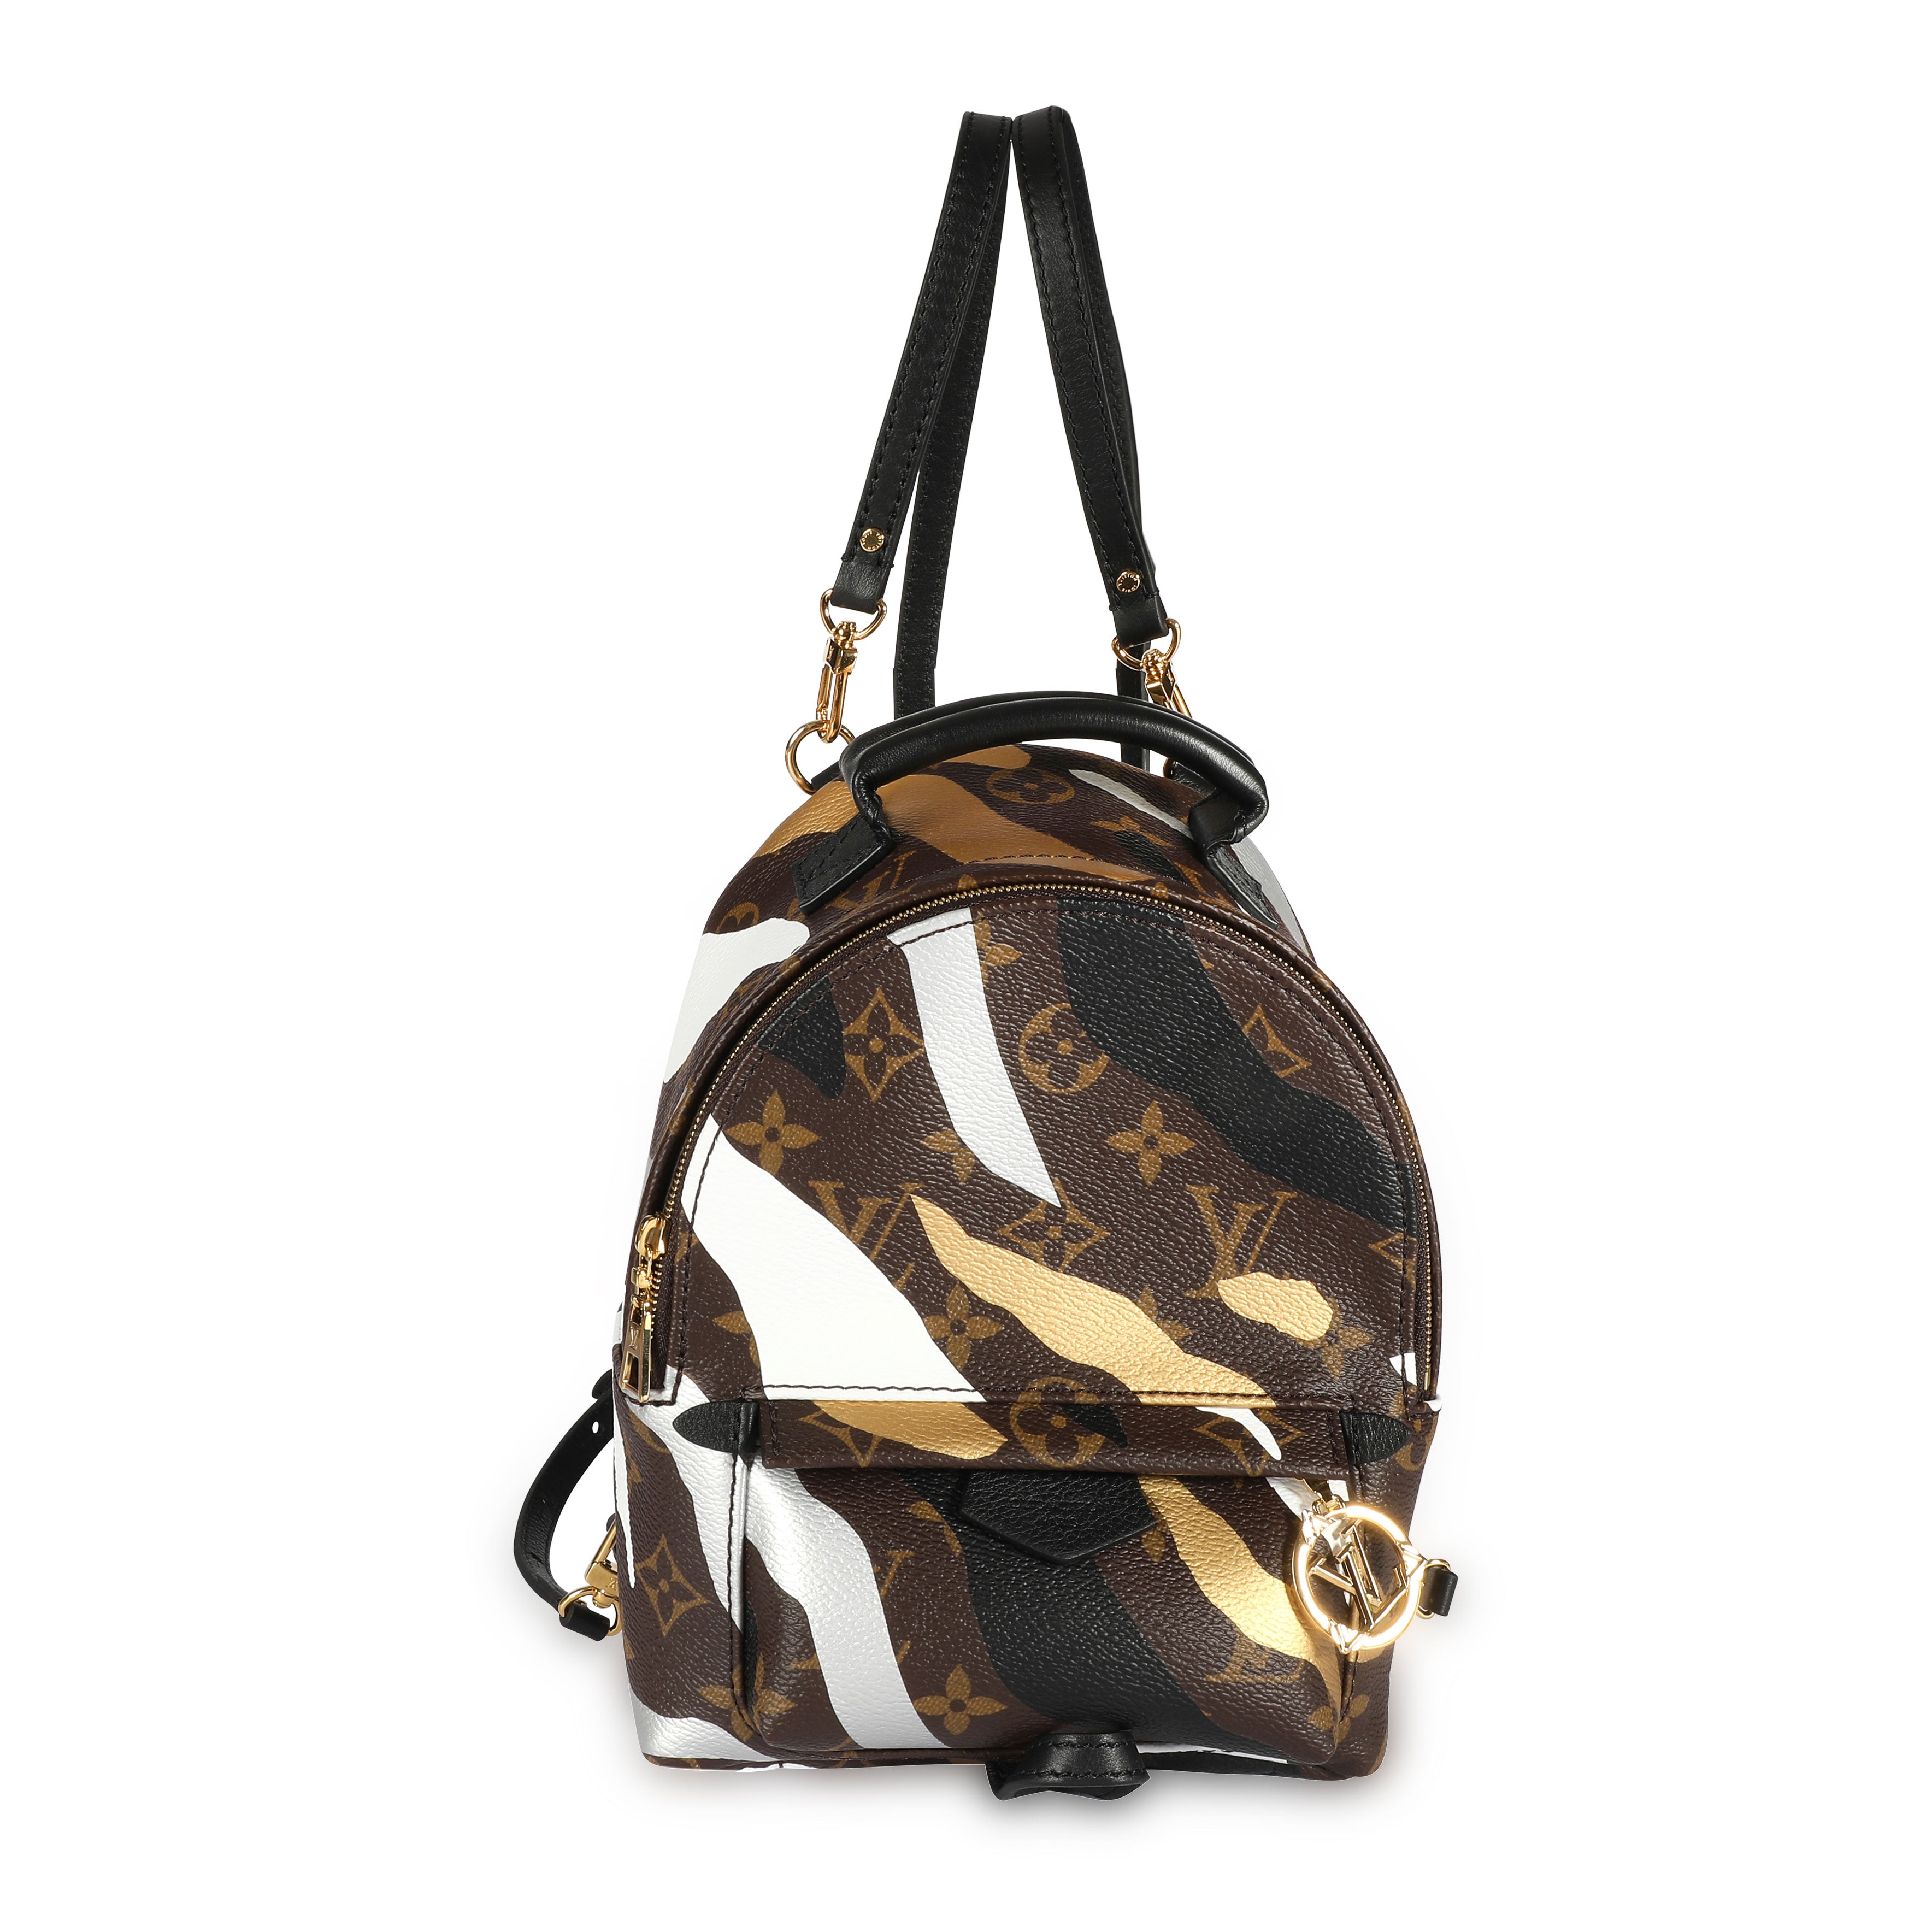 Louis Vuitton Palm Springs Mini Backpack - Touched Vintage